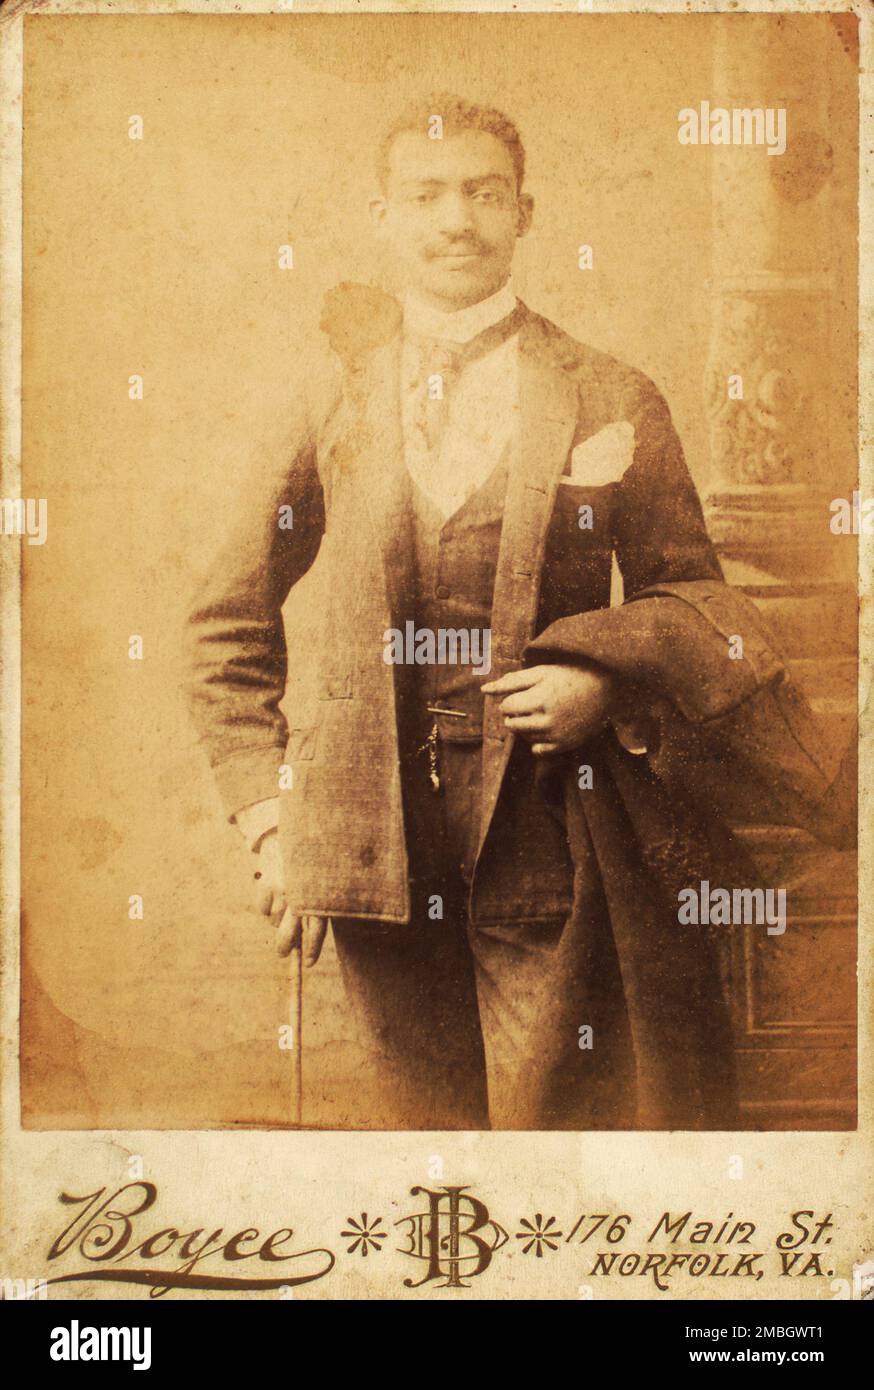 Dapper man, coat draped over his arm, and cane in hand, c1880-c1889. Stock Photo